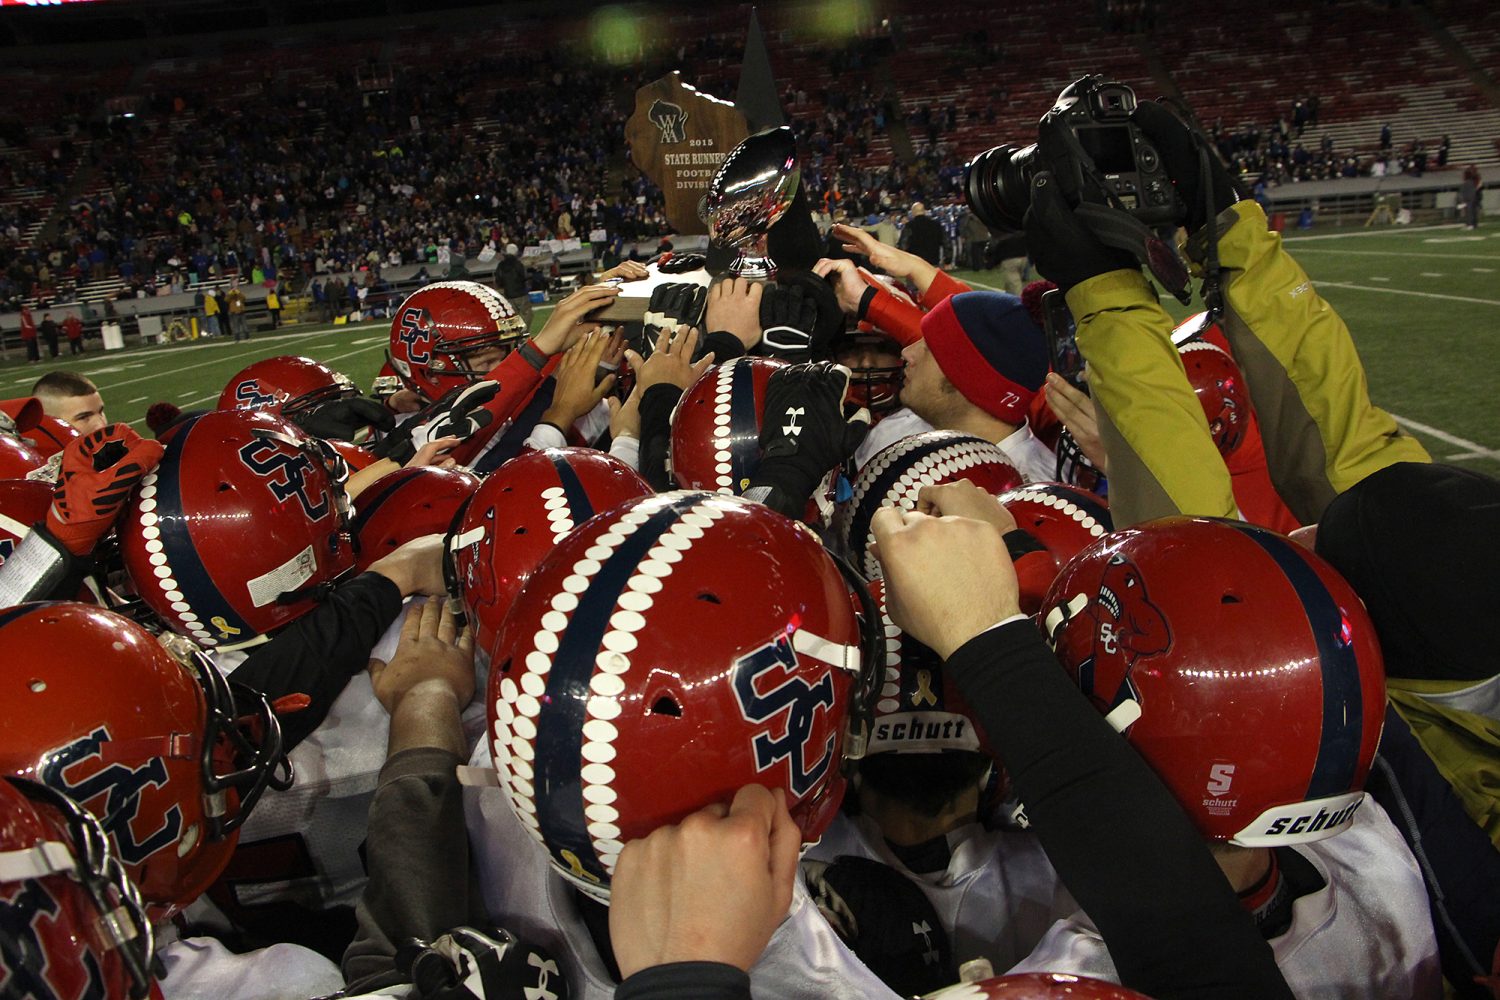 Spencer/Columbus players hoist their second-place trophy after the Rockets lost to Amherst 42-0 in the WIAA Division 5 State Championship Game at Camp Randall Stadium in Madison, Thursday, Nov. 19, 2015.